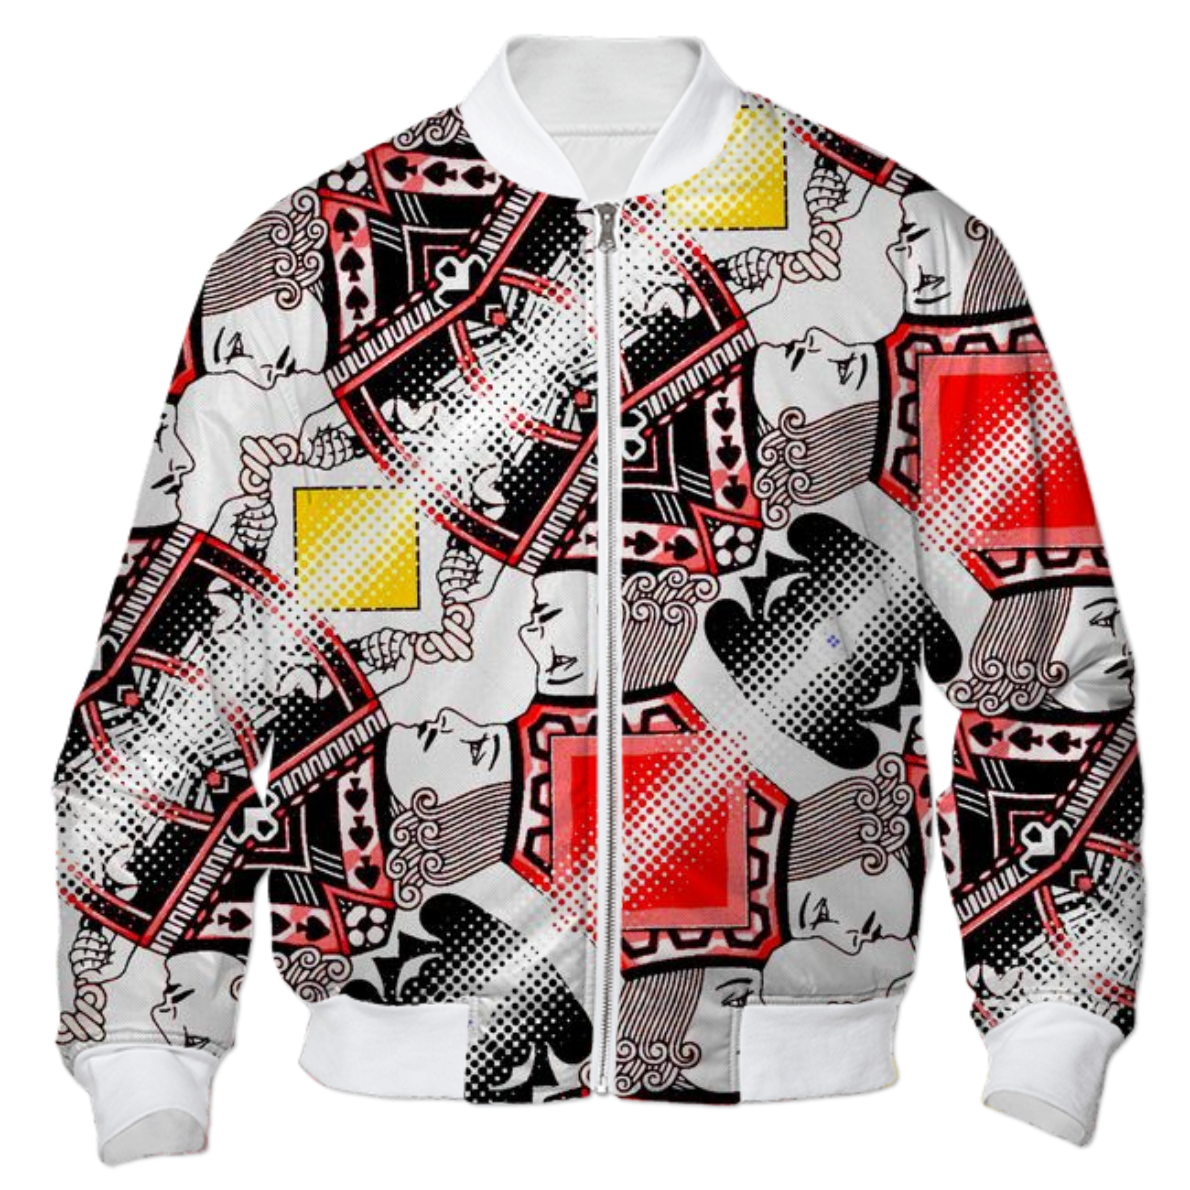 Shop JACK OF SPADES Bomber Jacket by THE GRIFFIN PASSANT STREETWEAR ...